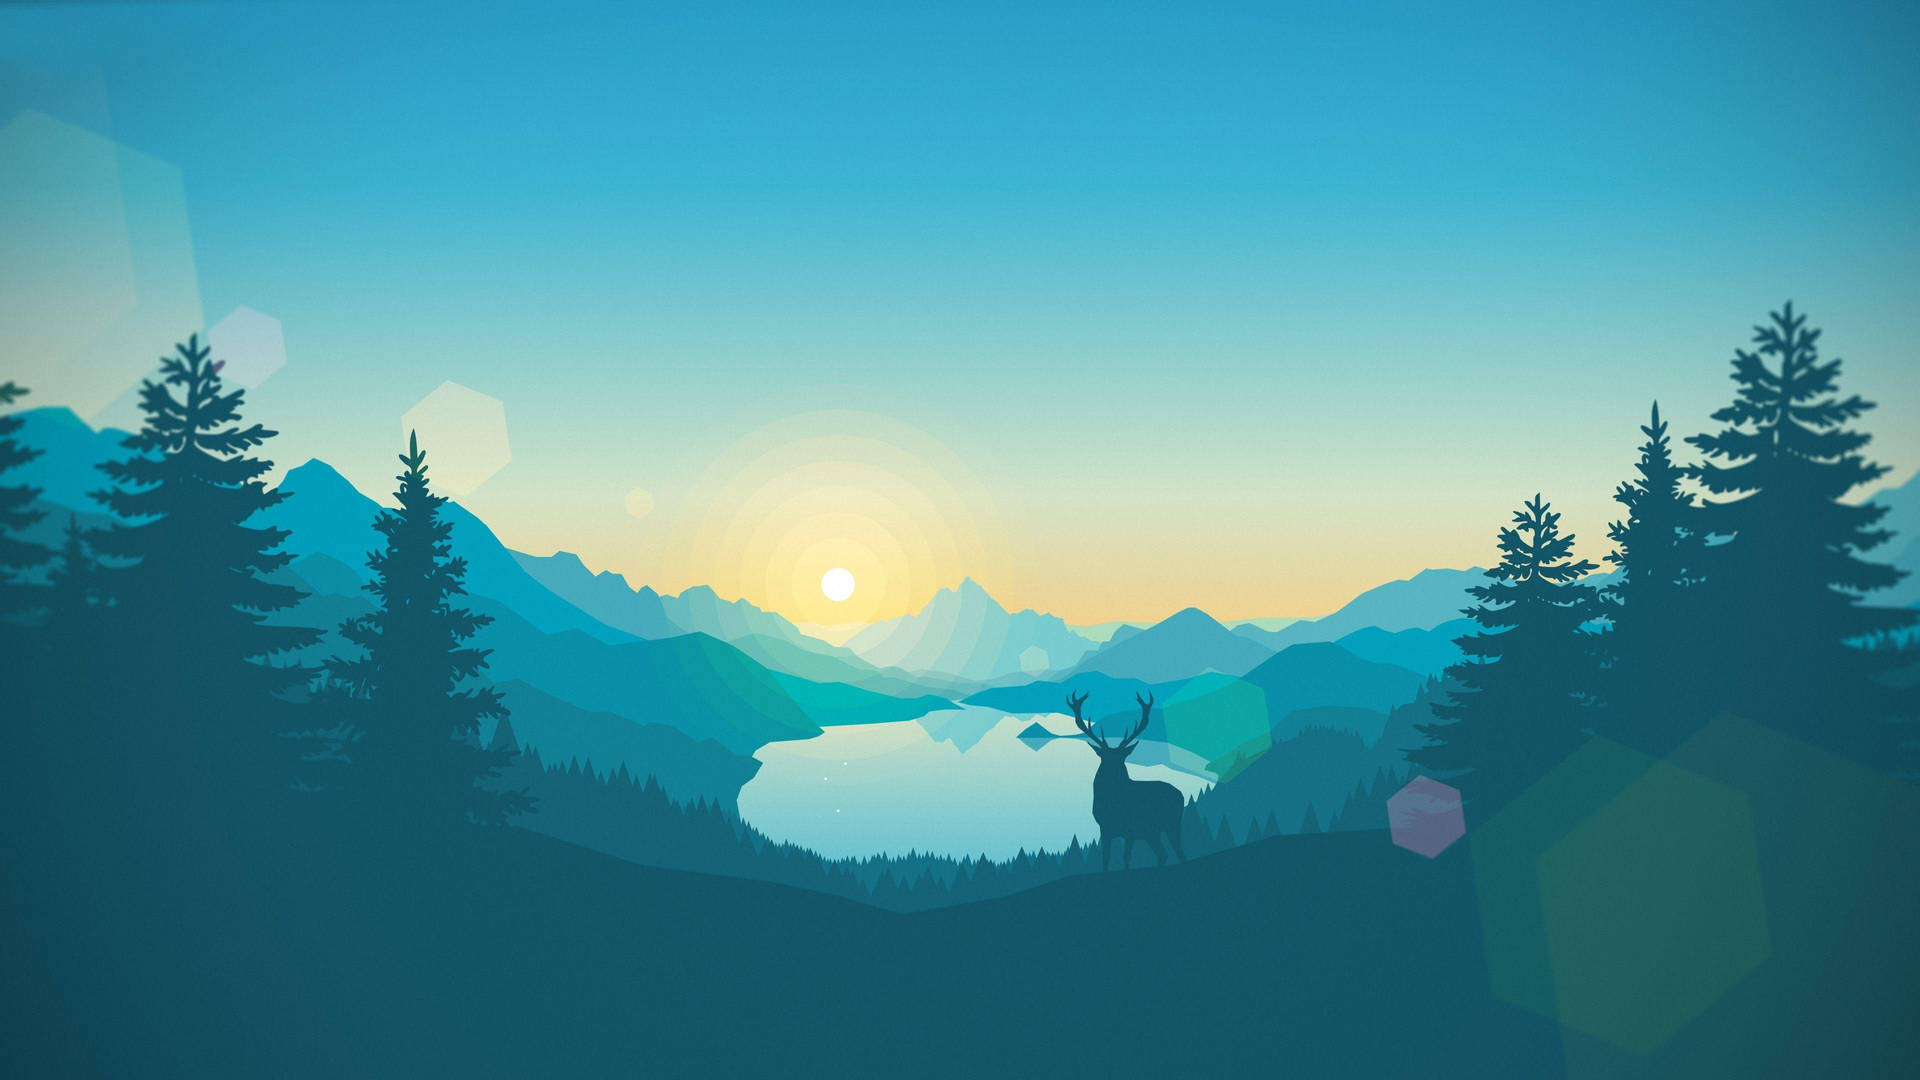 A Deer Silhouette at Sunrise at Lake Firewatch Wallpaper